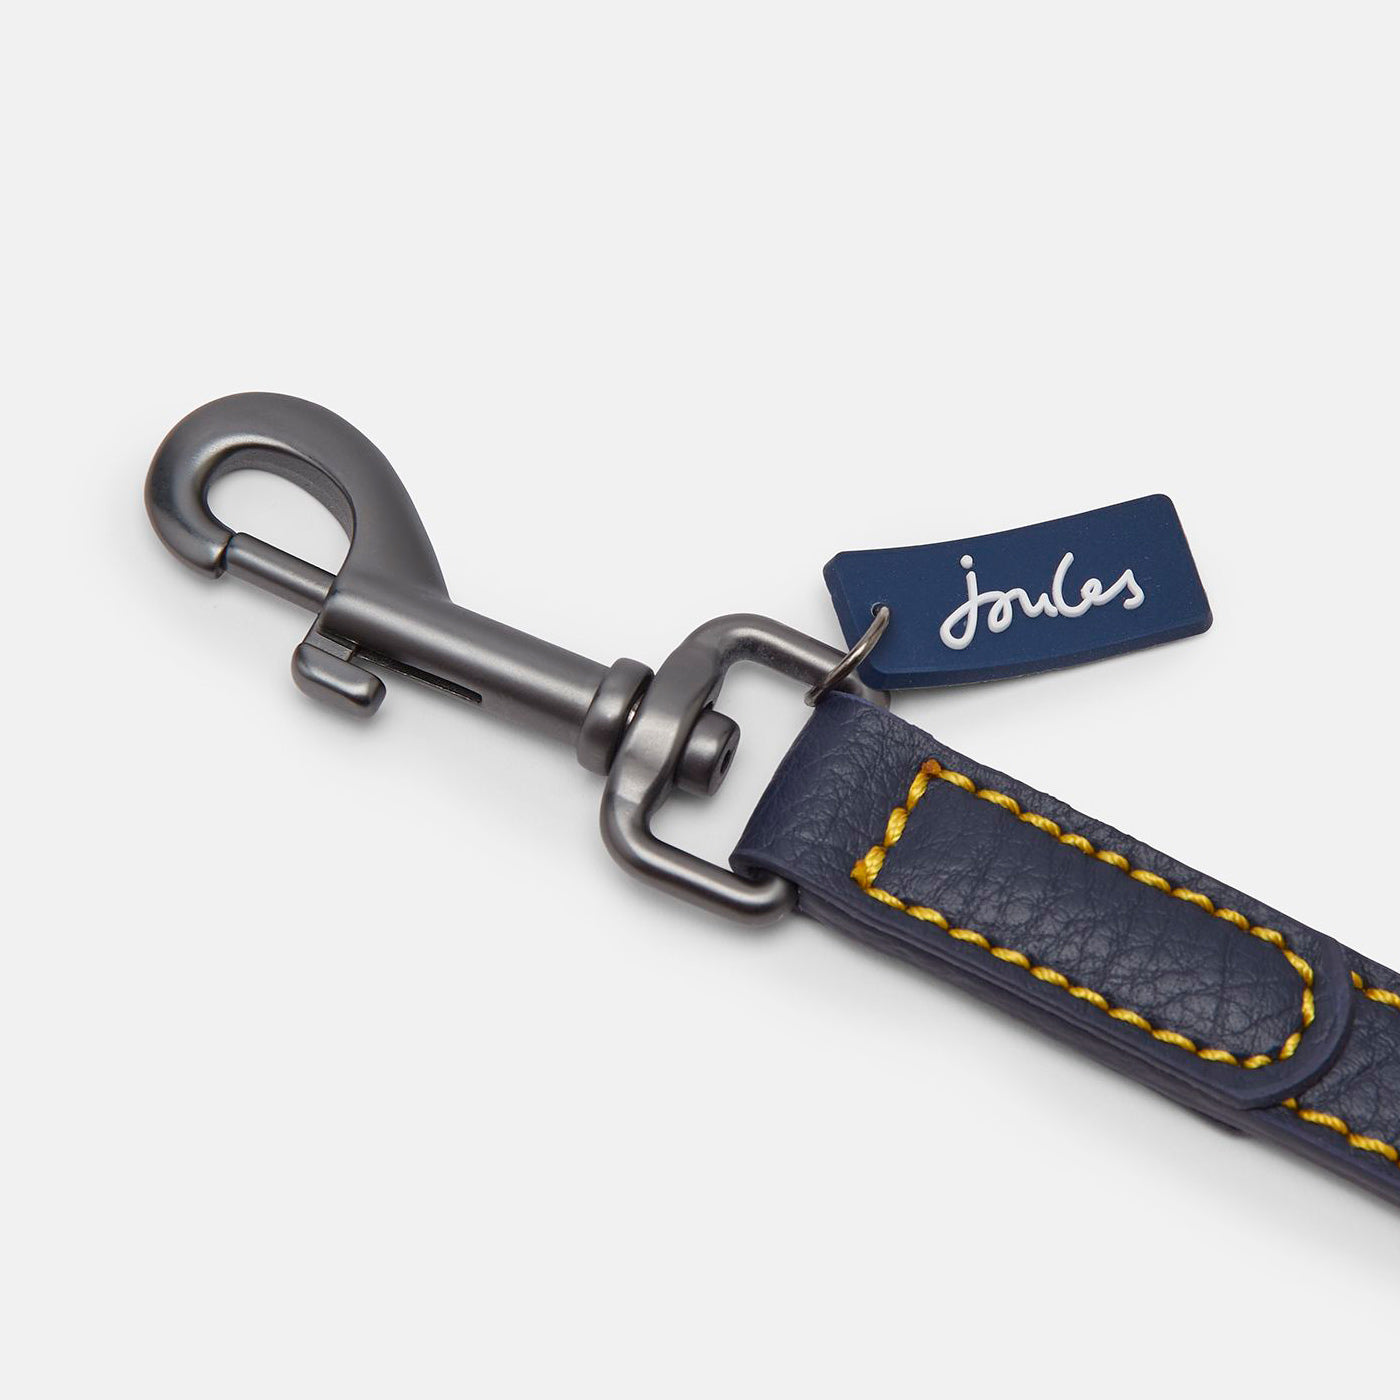 Joules navy leather dog lead close up of clasp in studio